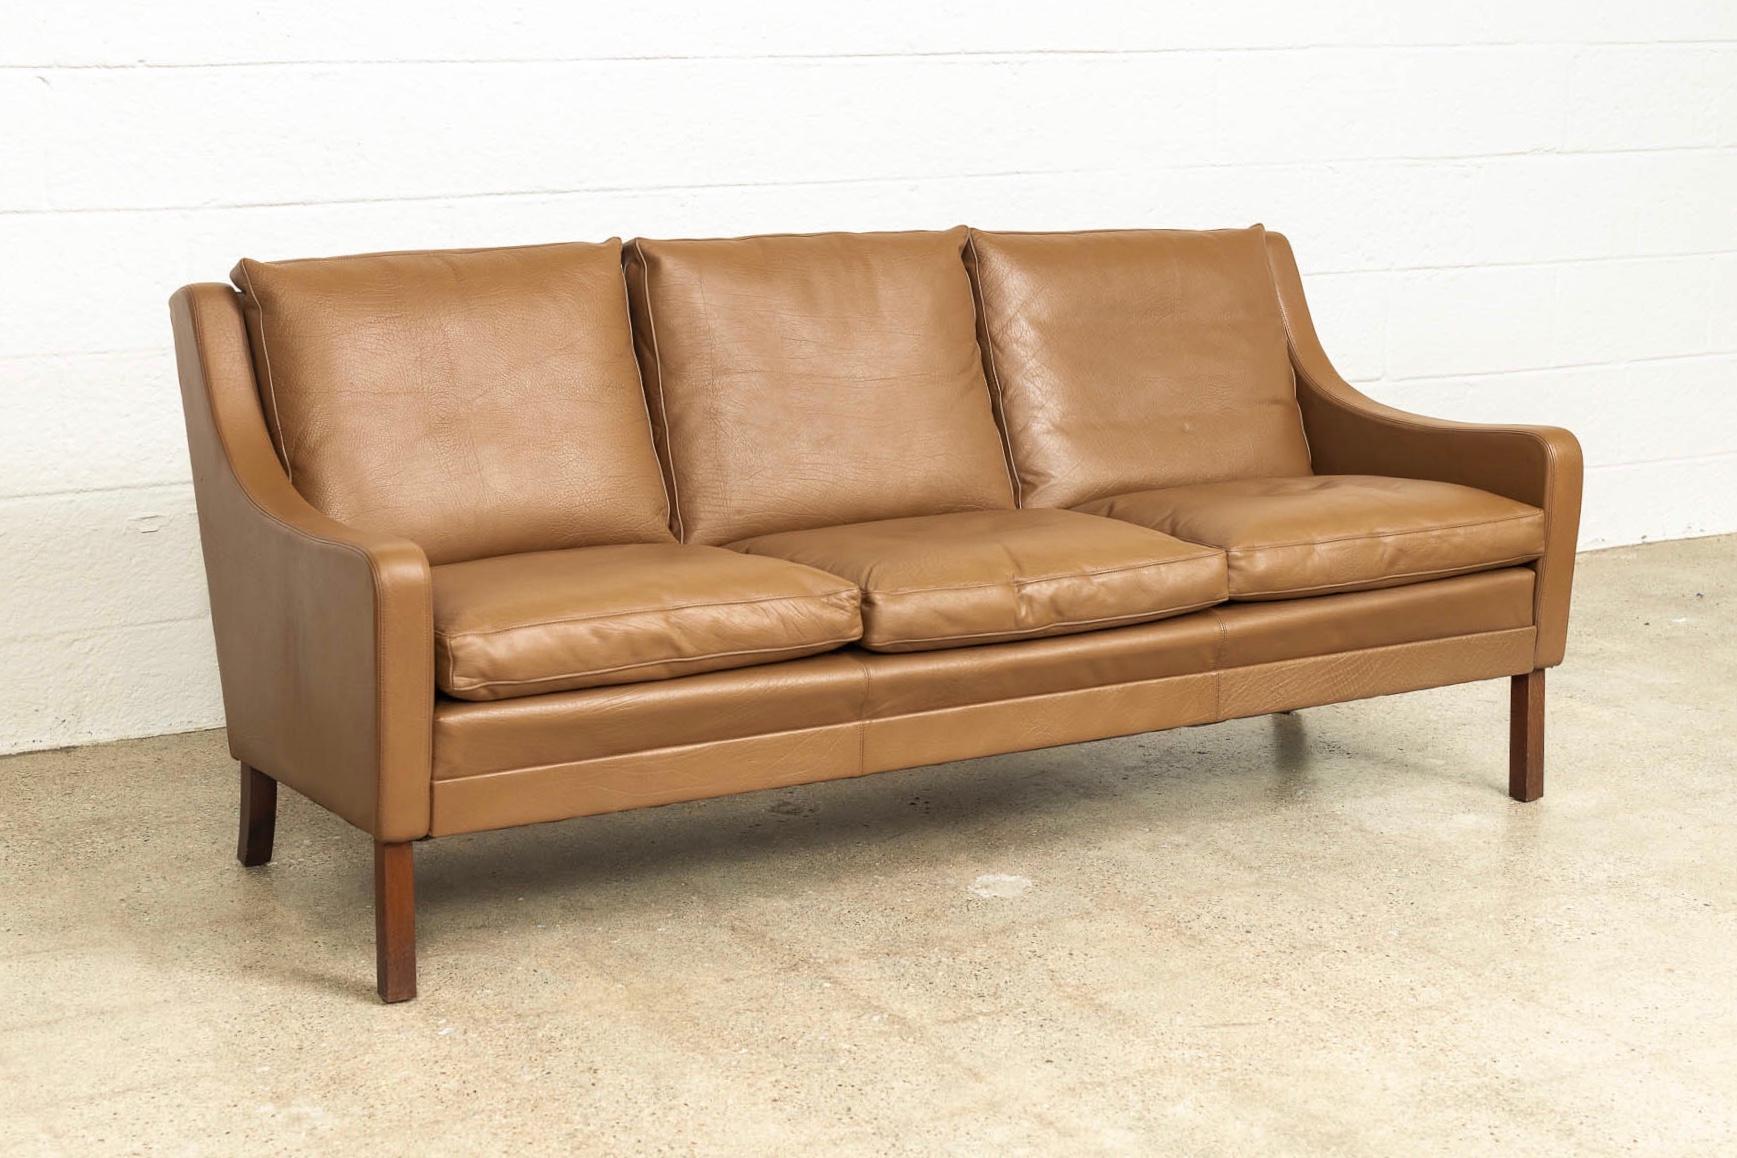 This vintage midcentury Danish modern leather sofa in the style of Borge Mogensen was made in Denmark circa 1960. With classic Danish styling, it features clean lines and gentle curves. This three-seat couch has six removable zippered cushions and